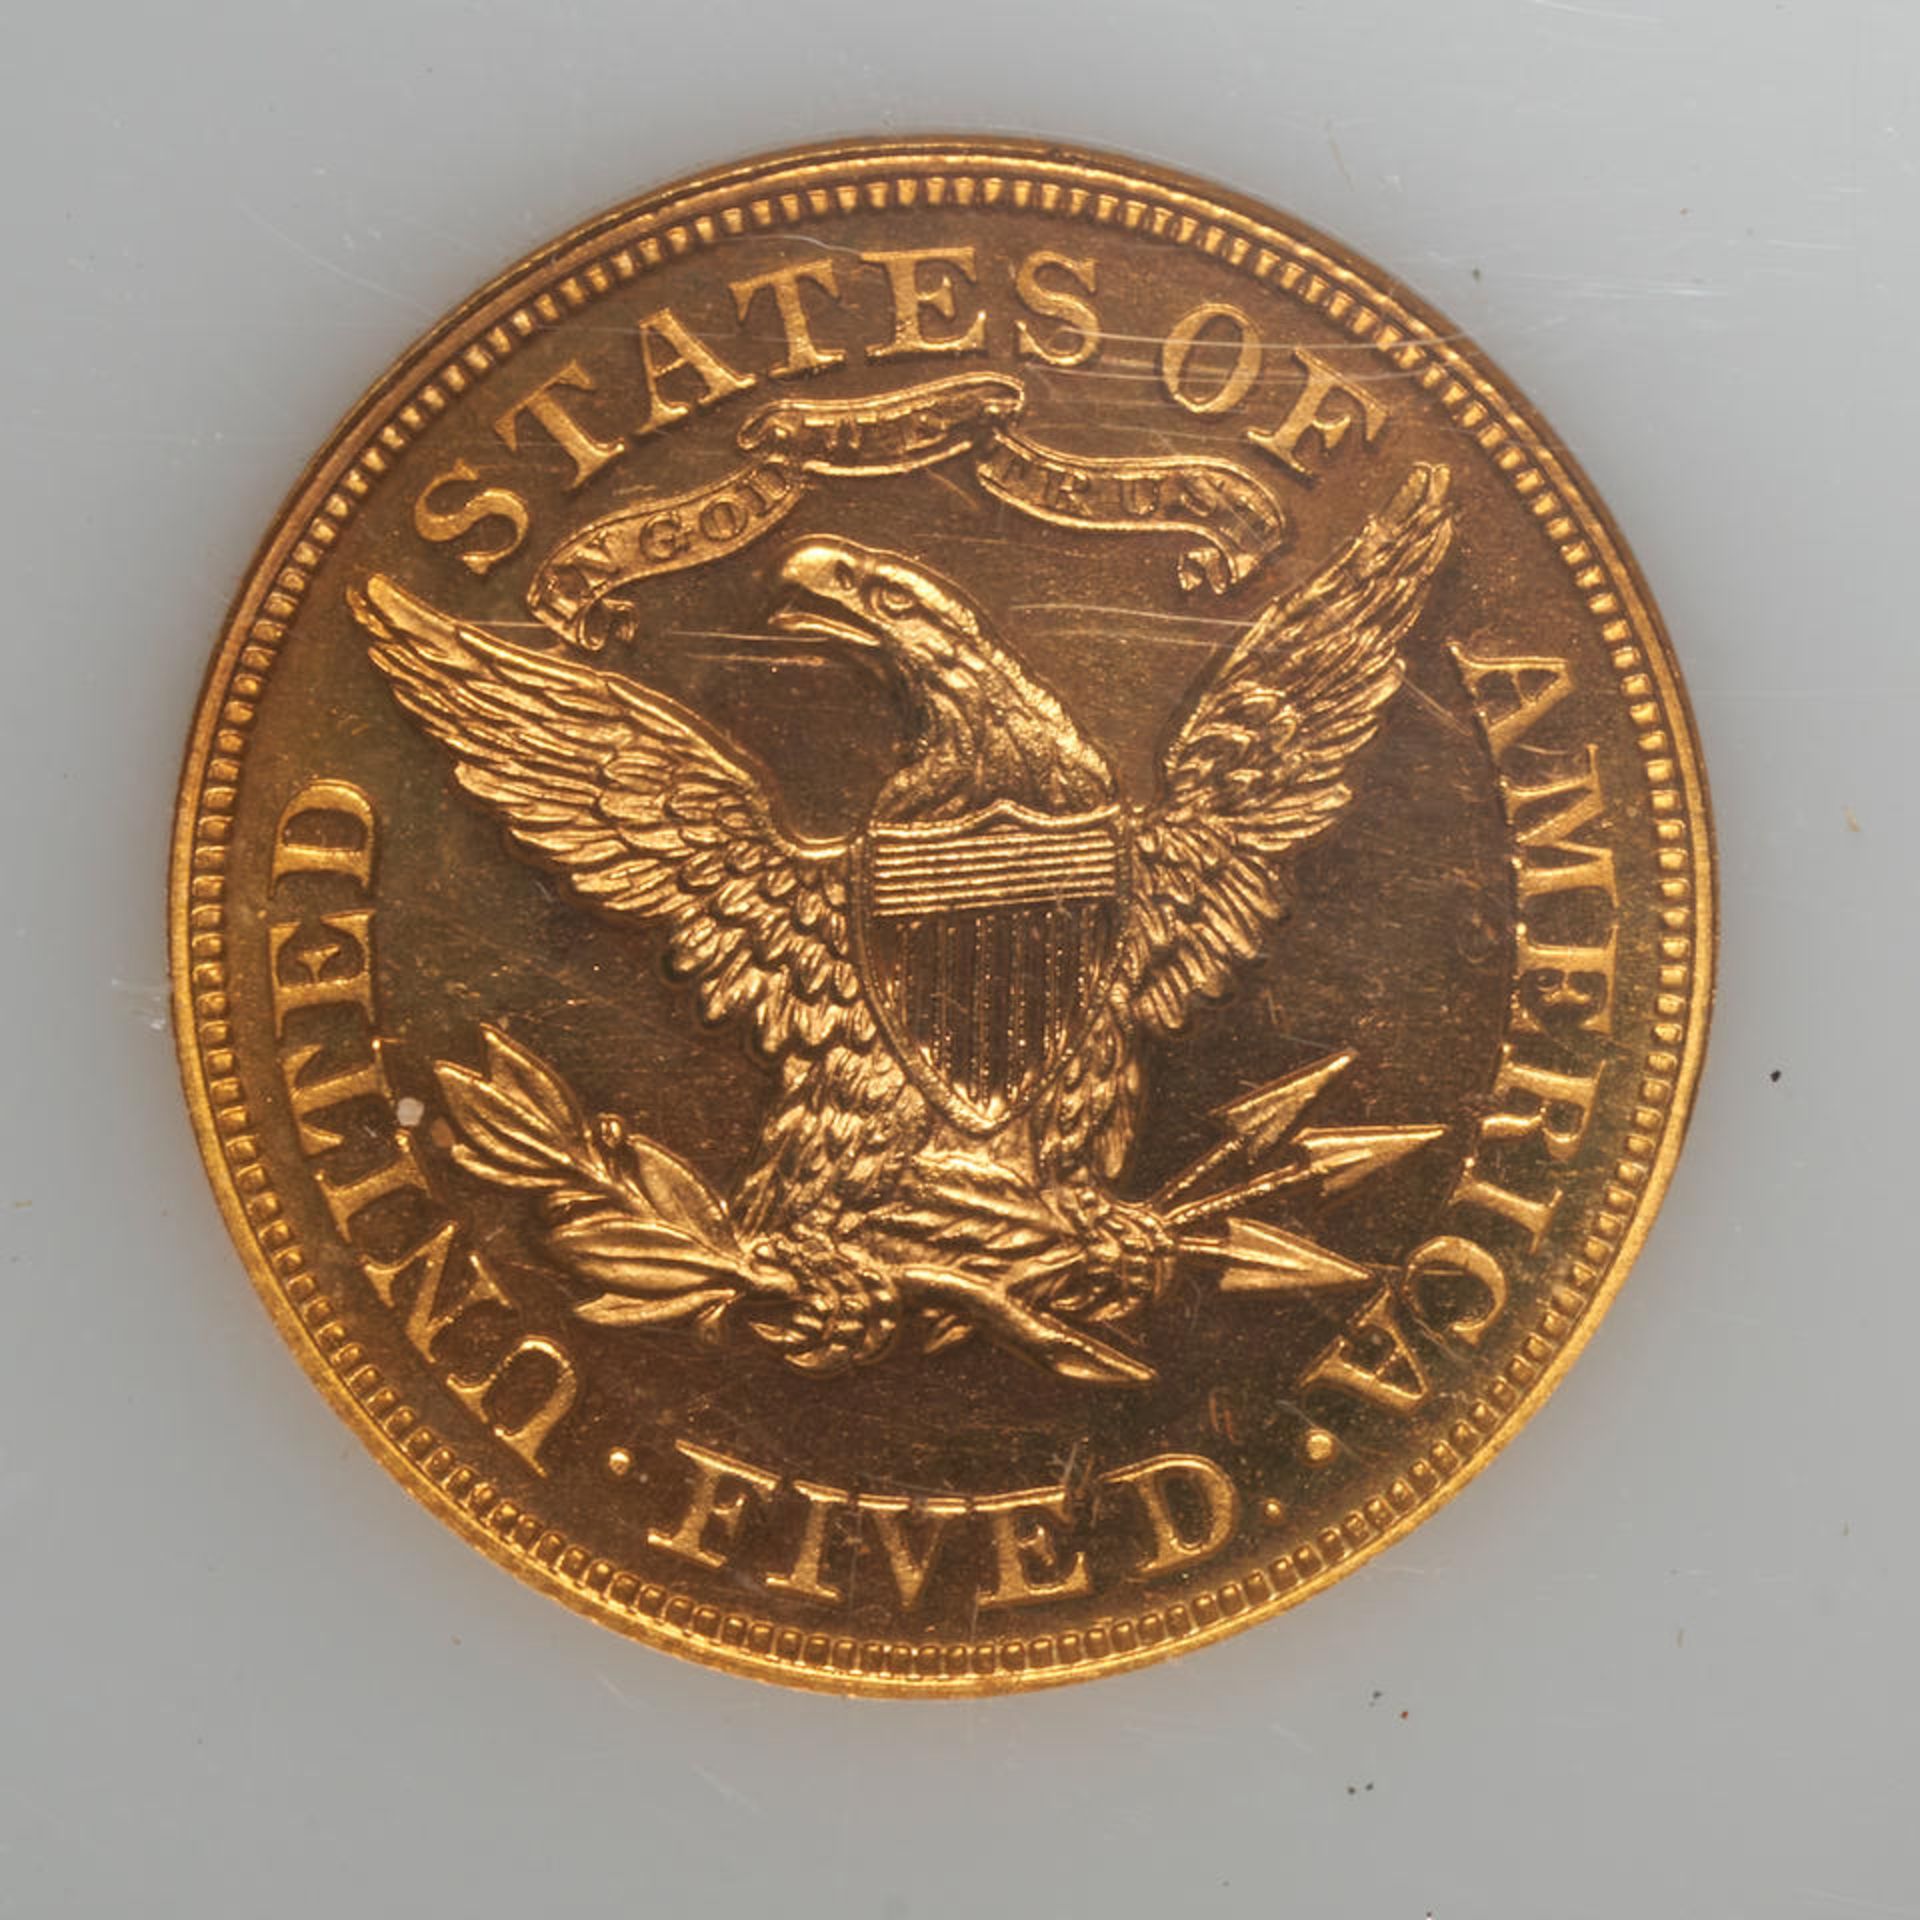 United States Proof 1876 Liberty $5 Half Eagle Gold Coin. - Image 2 of 4